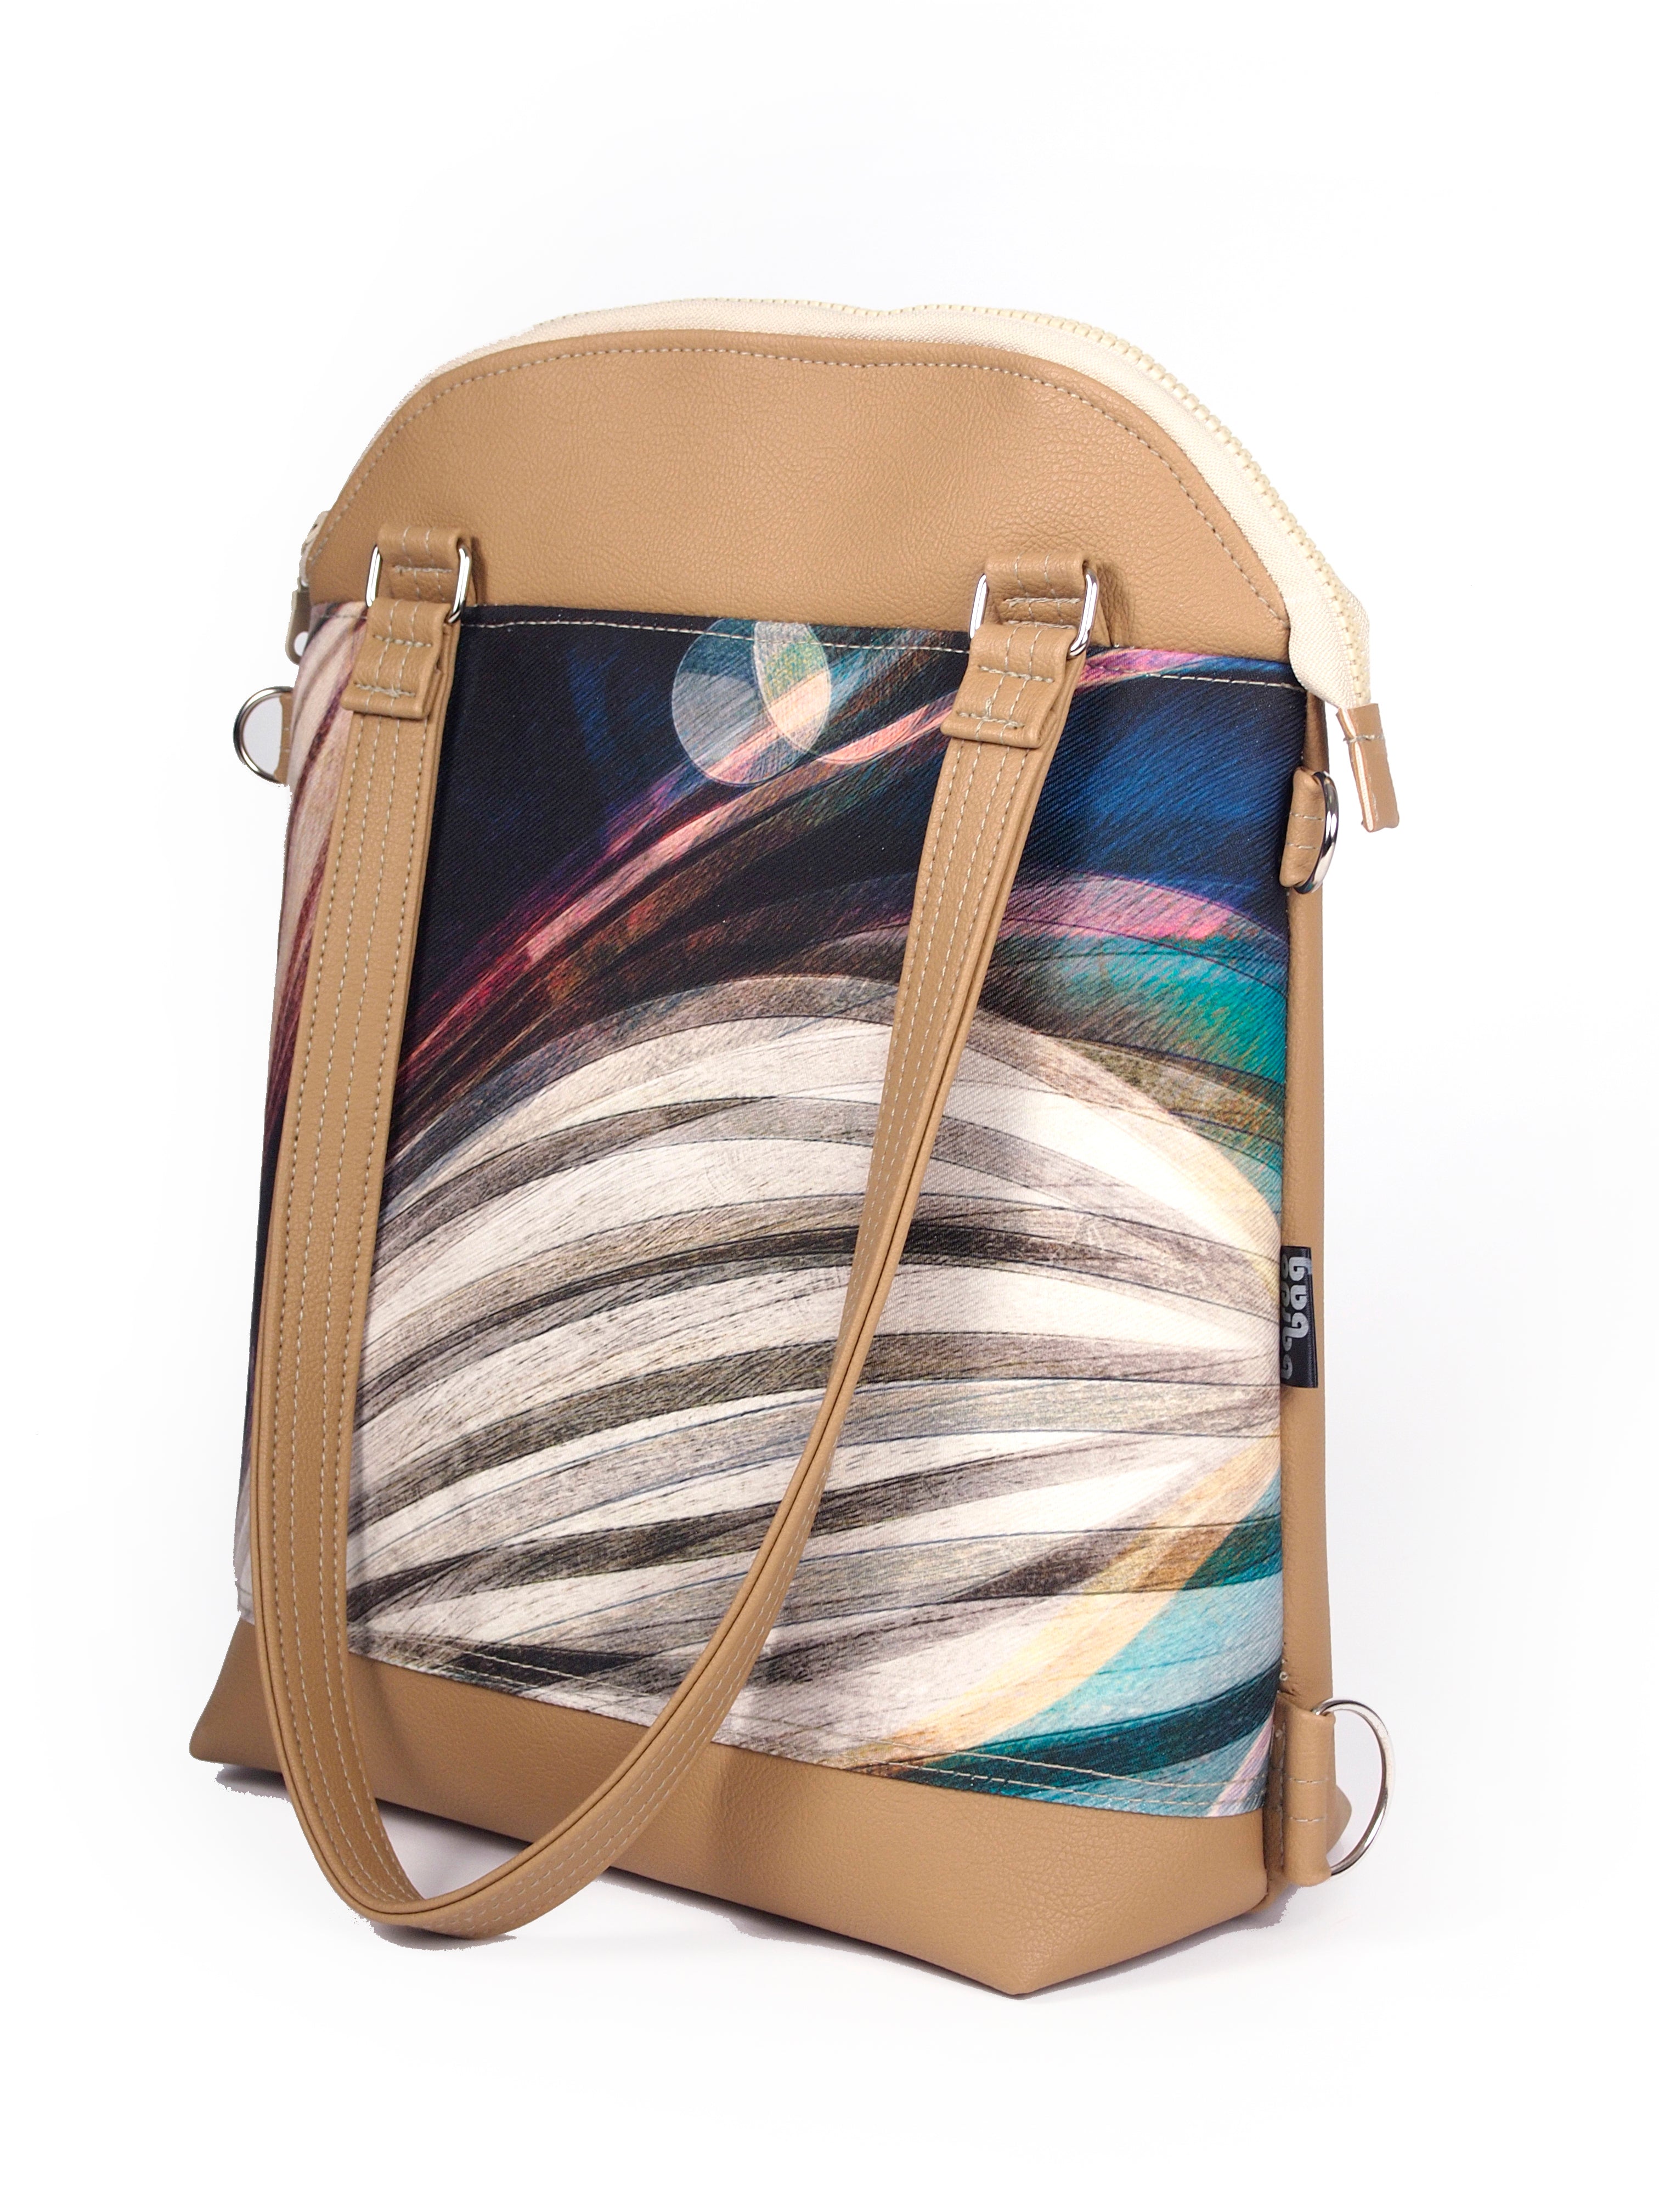 Bardo classic bag and backpack - Spring - Premium  from BARDO ART WORKS - Just lv89.00! Shop now at BARDO ART WORKS